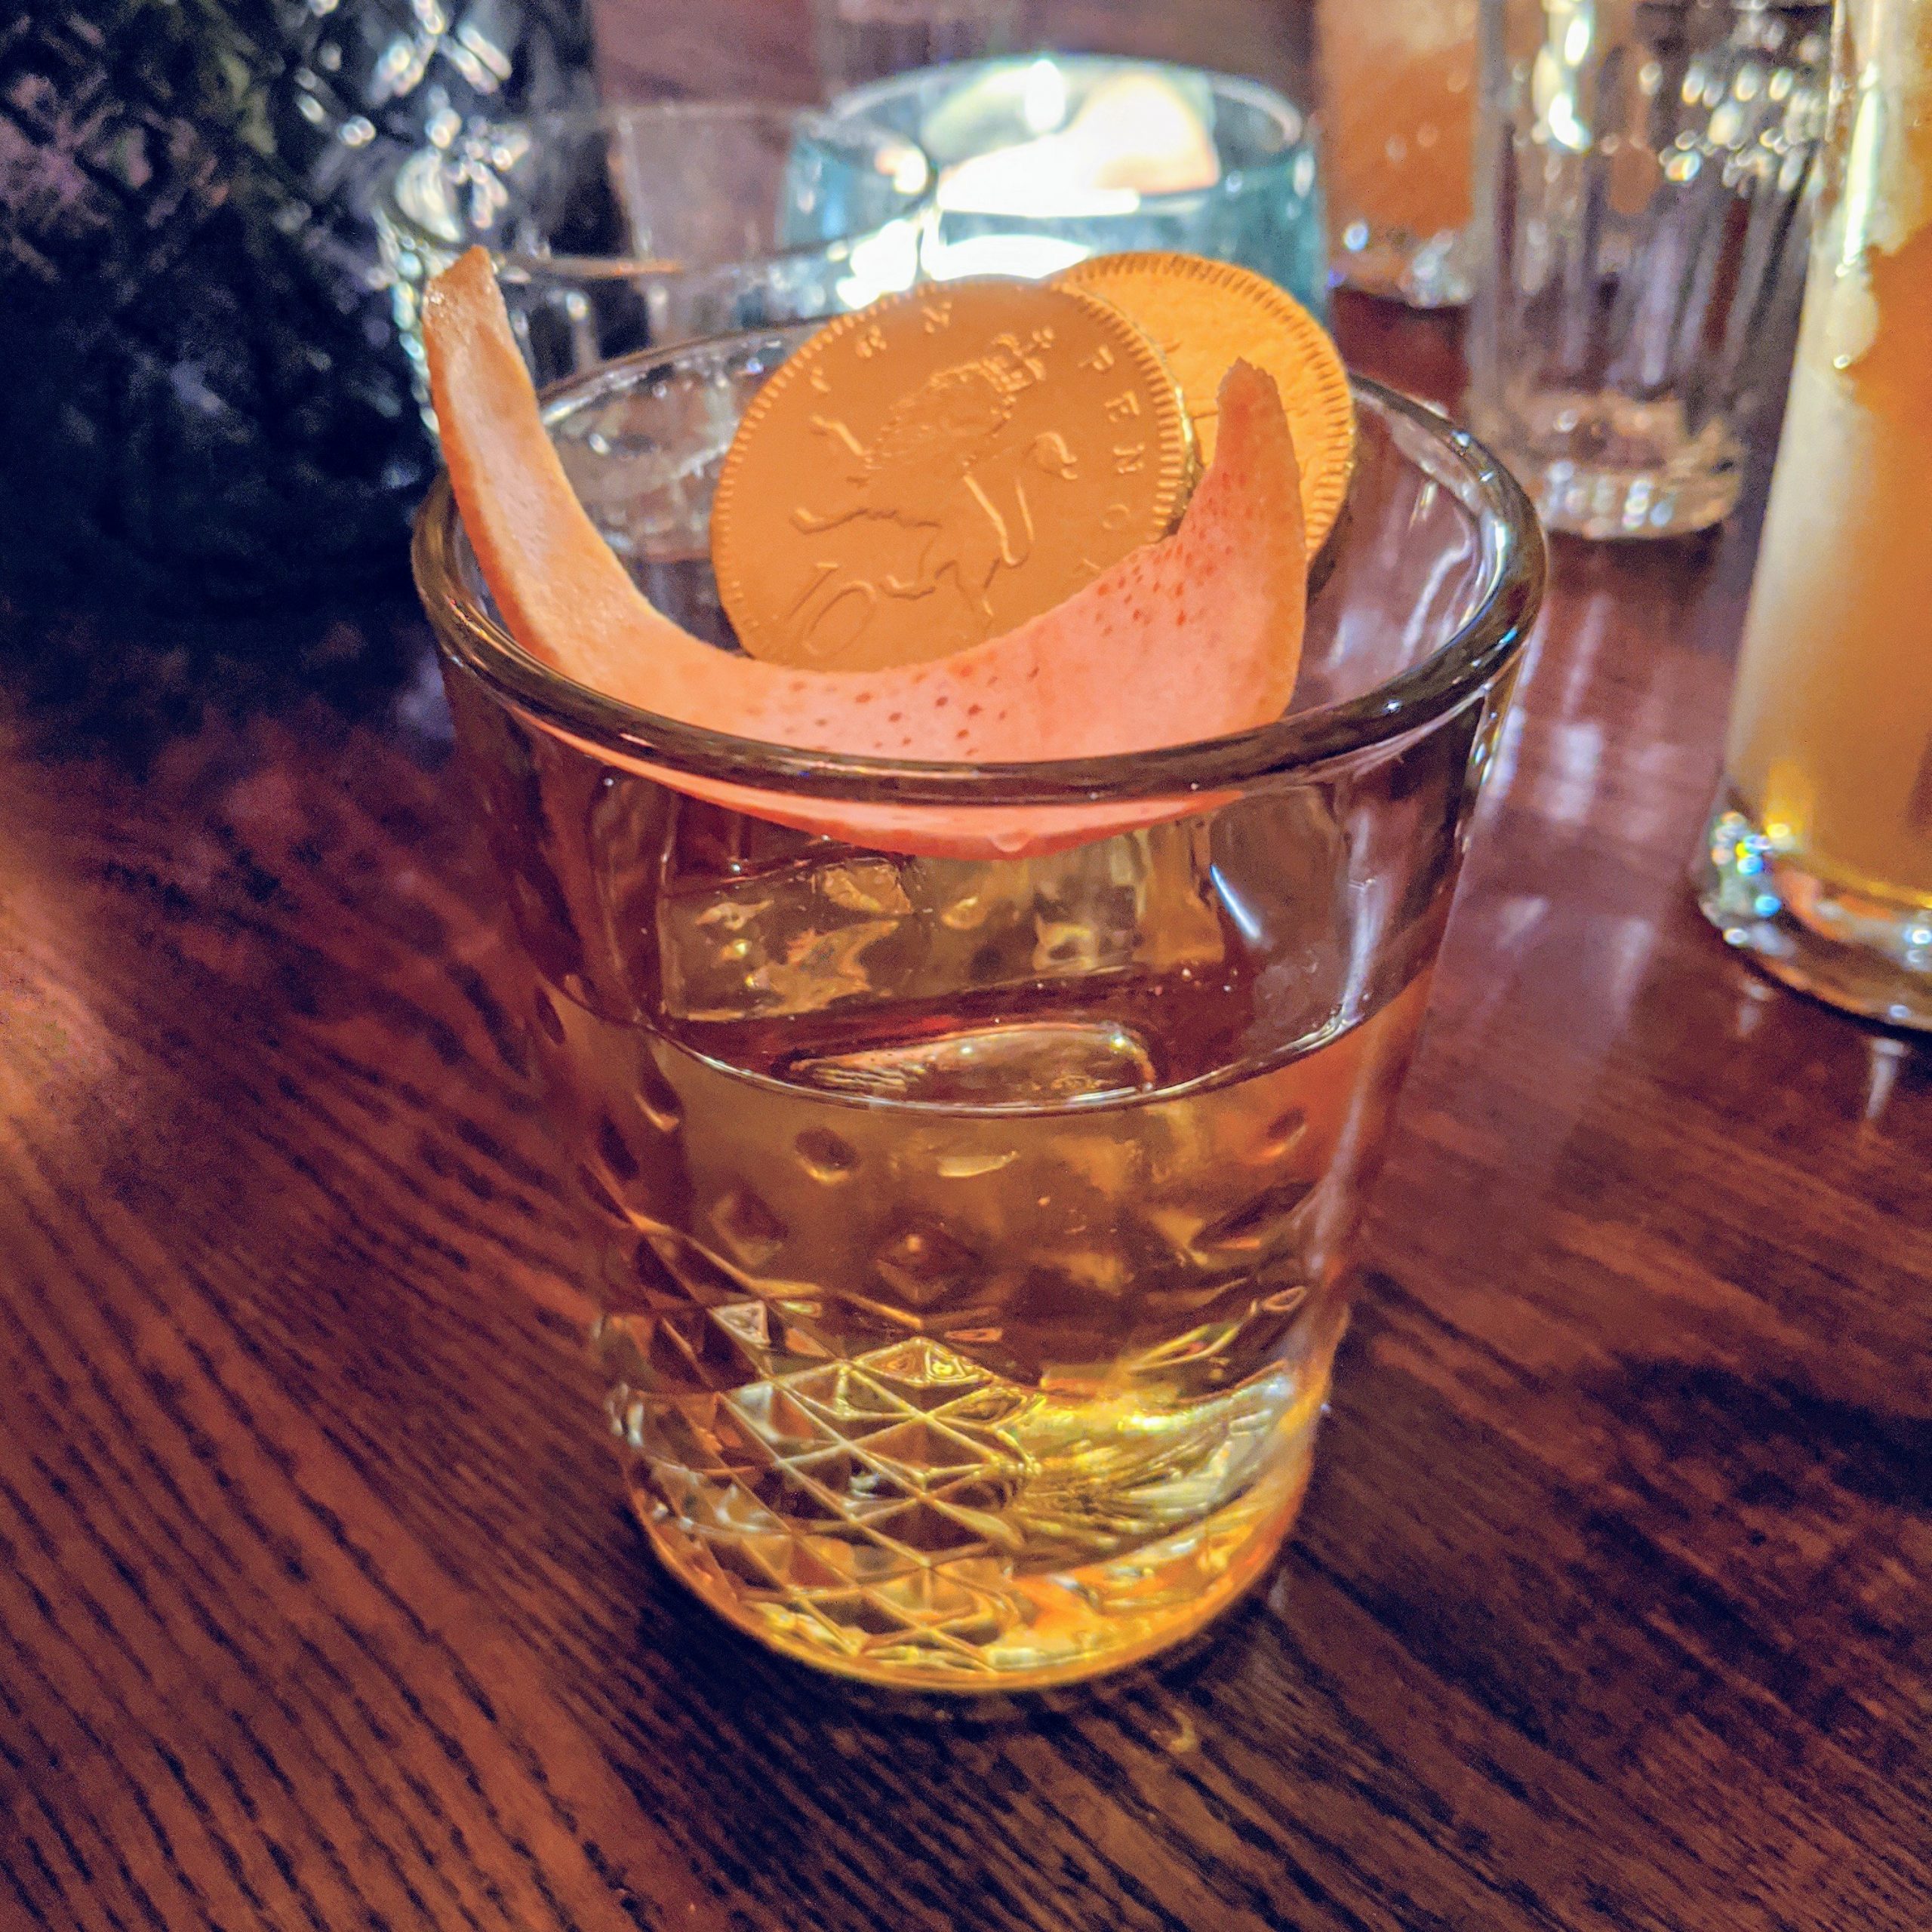 Old fashioned-style cocktail with chocolate coins in it